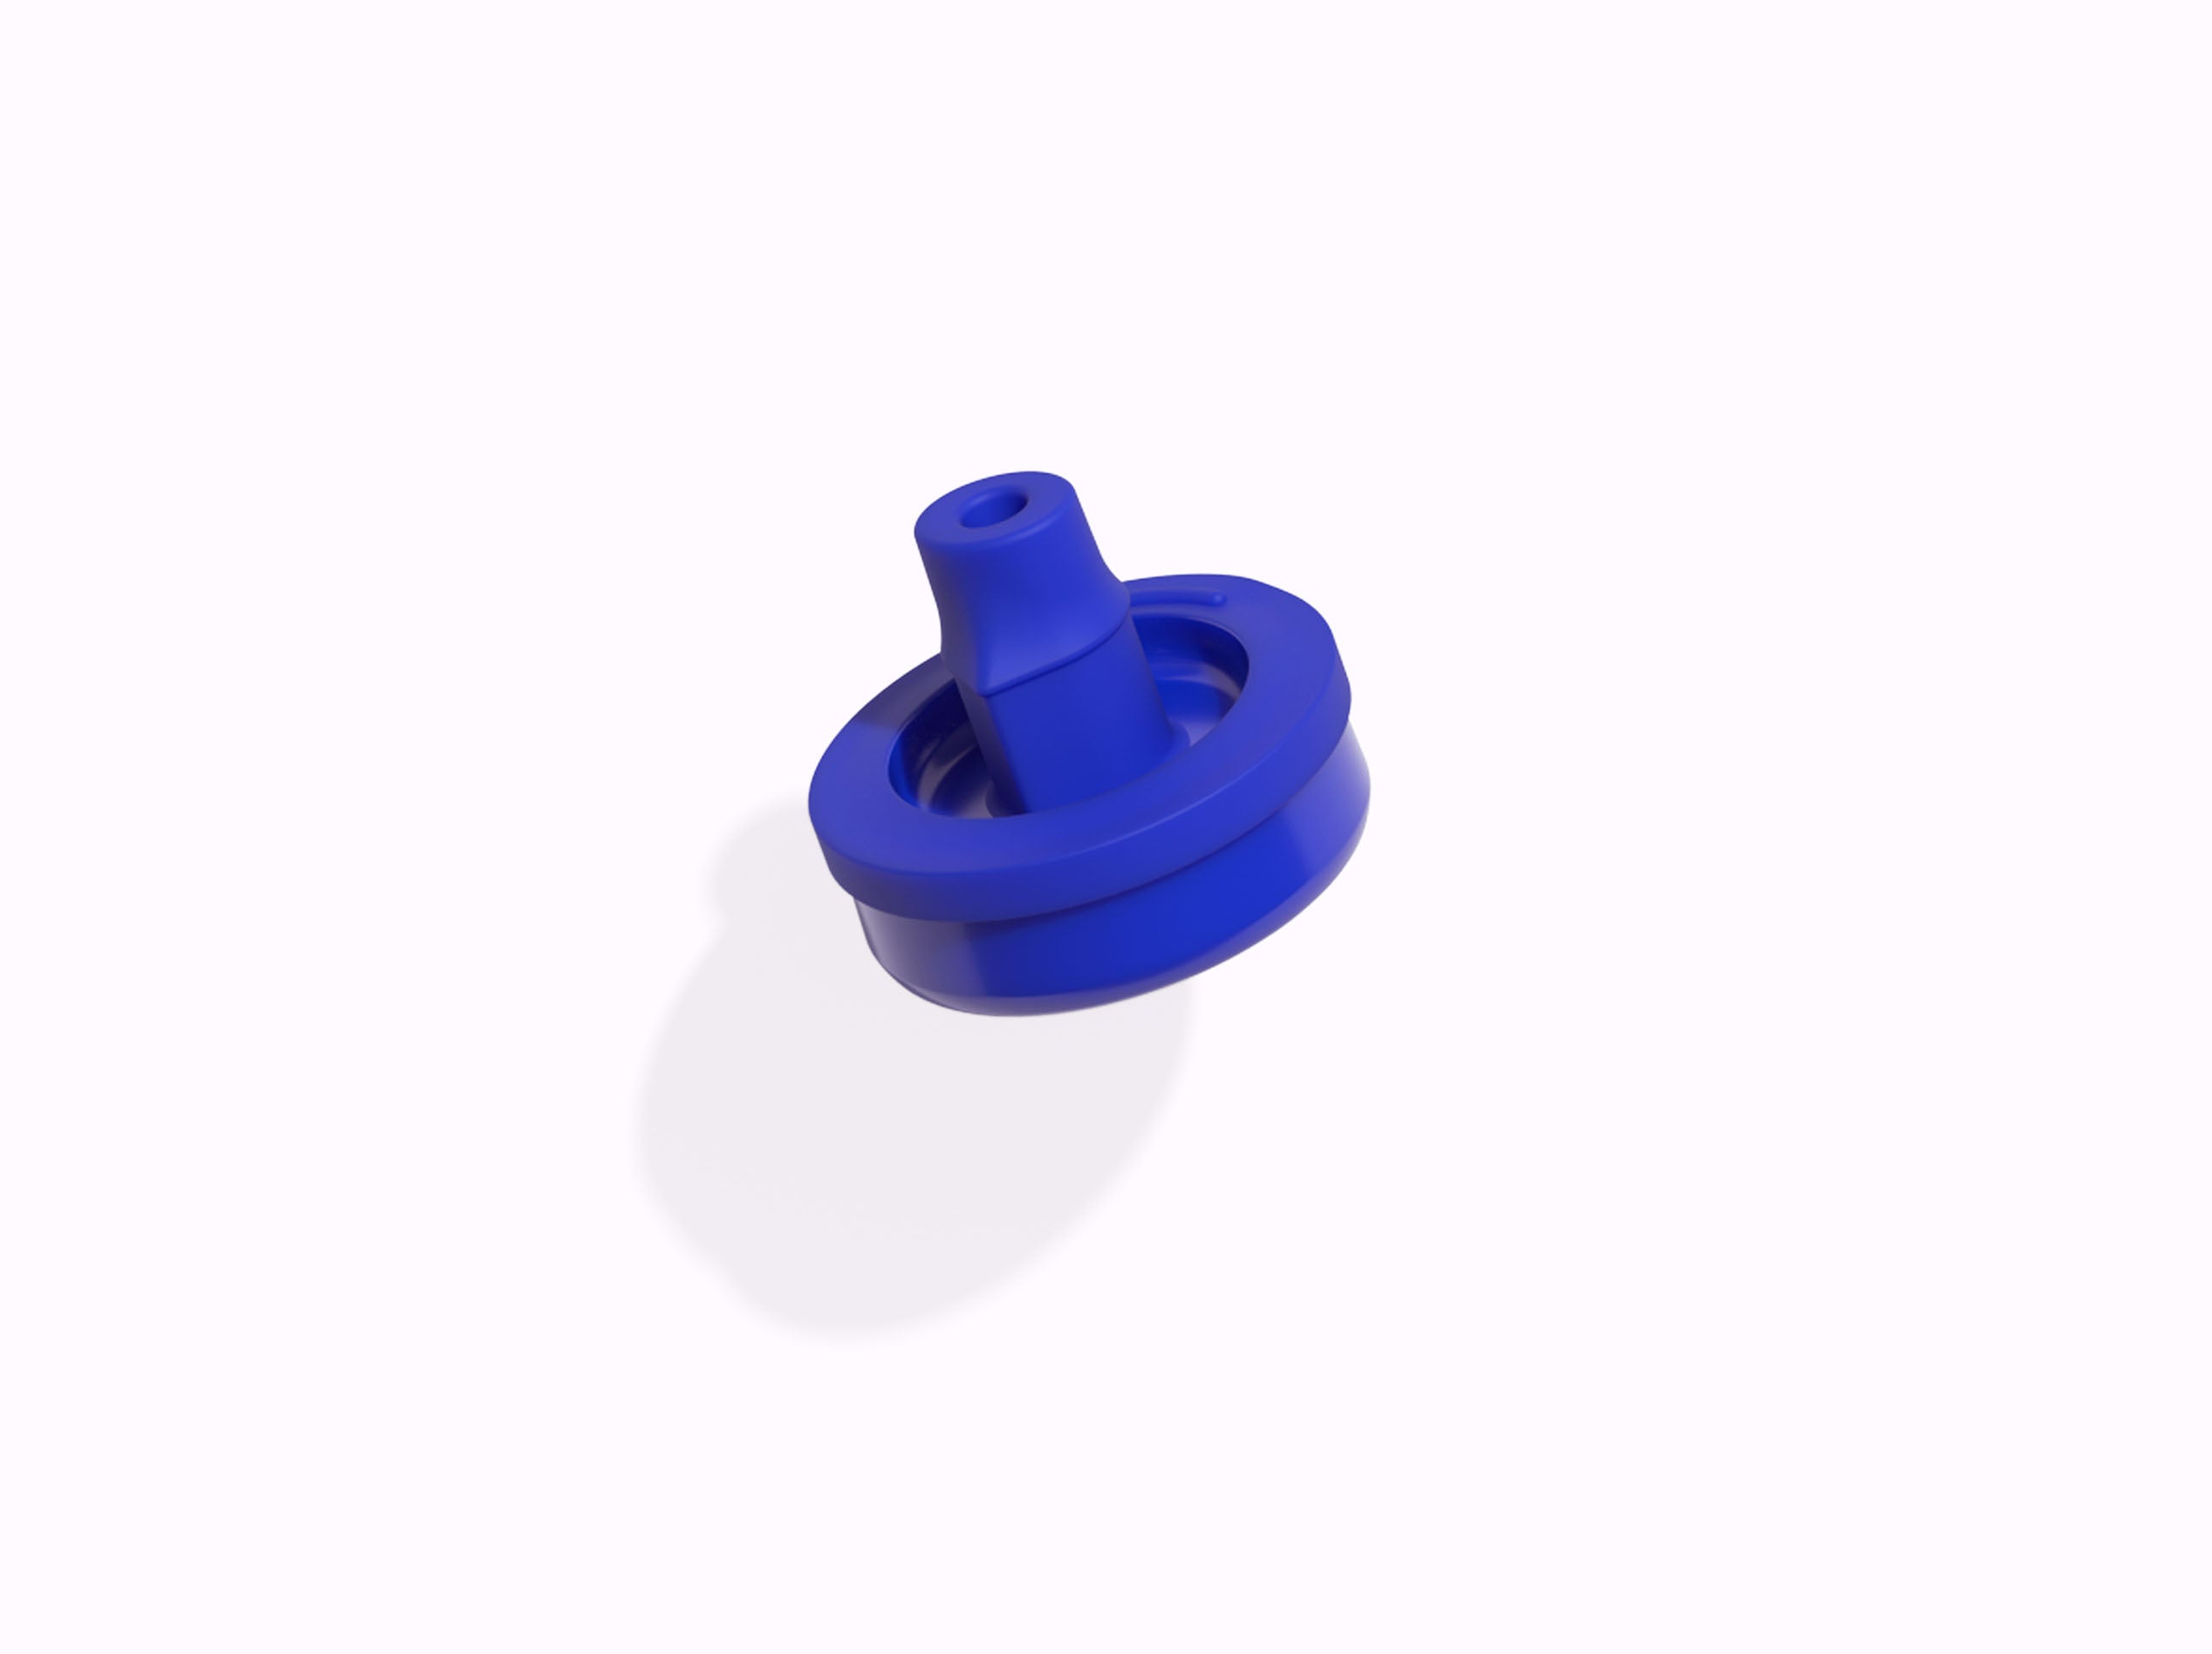 https://cdn.shopify.com/s/files/1/0635/3610/3657/products/AirUp_PDP_Accessories_Mouthpiece_RoyalBlue.jpg?v=1675889125